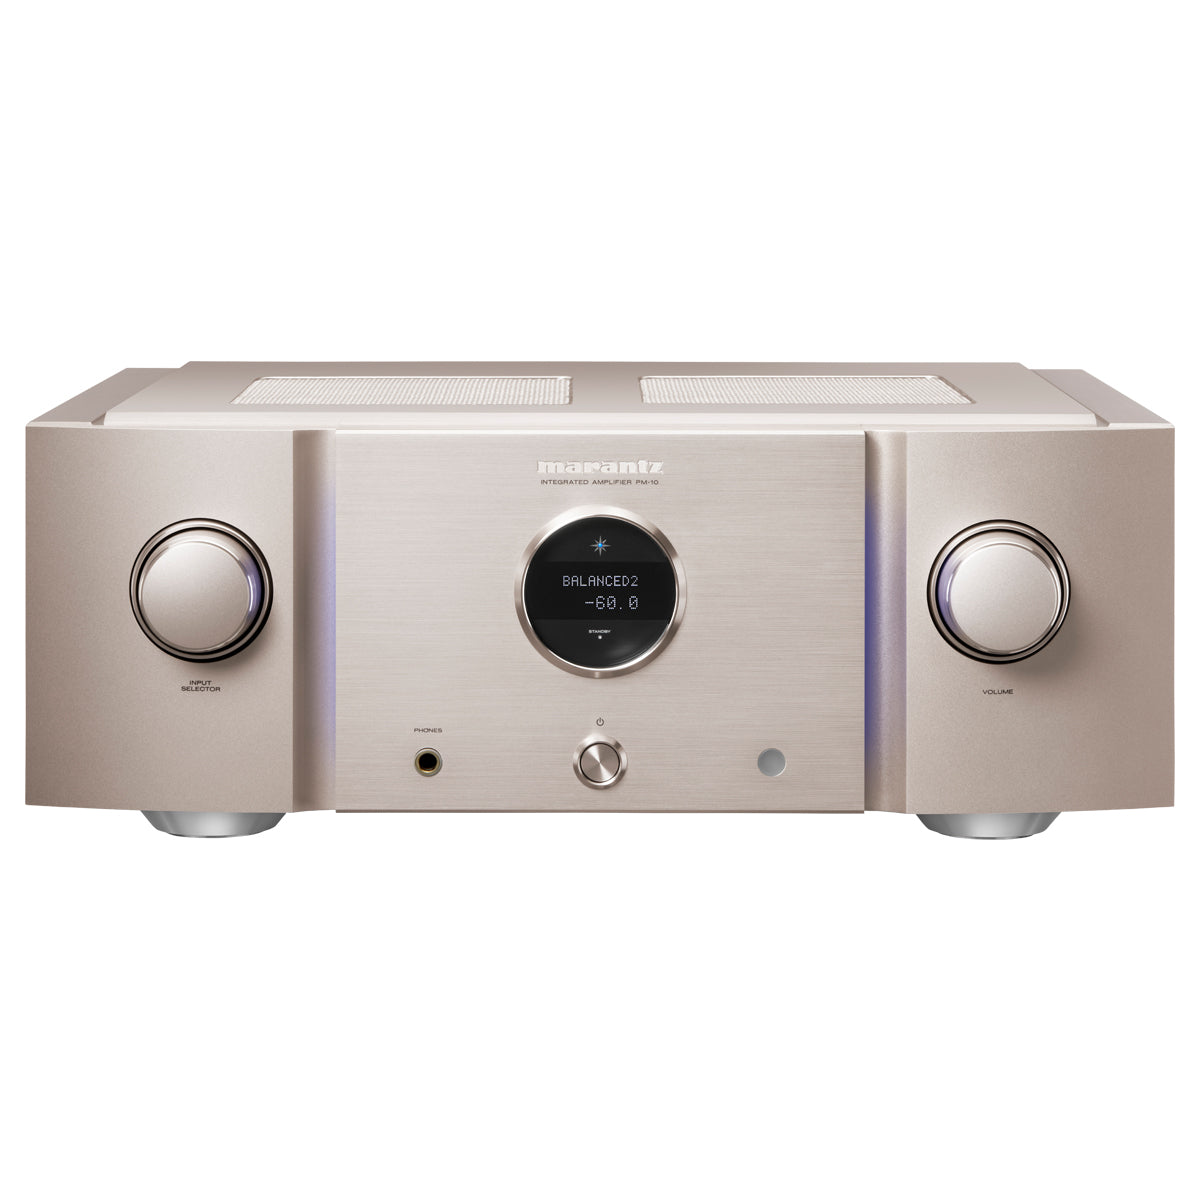 Marantz PM-10S1 Stereo Amplifier - Gold | Made In Japan - The Audio Experts